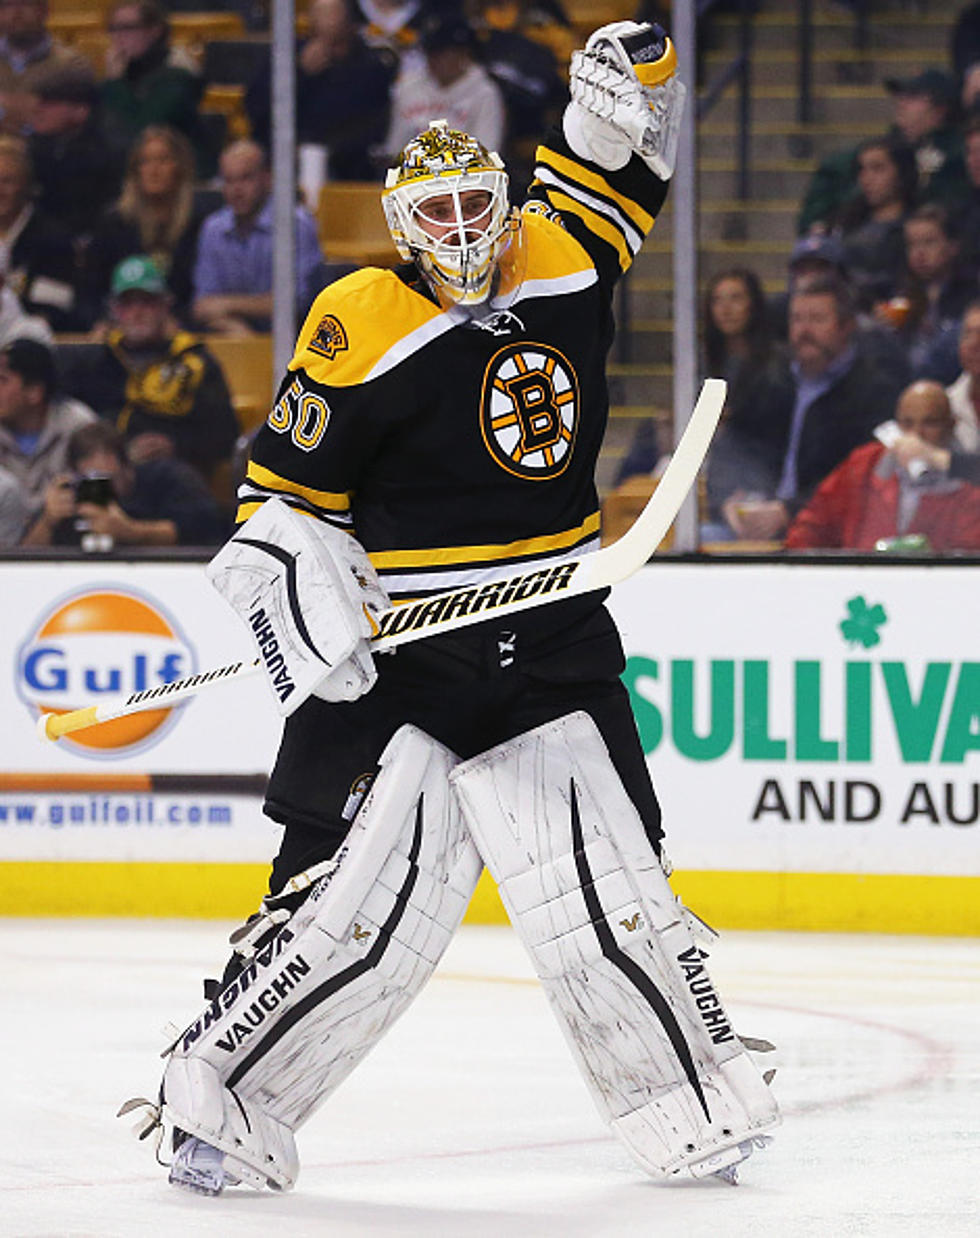 Gustavsson, Spooner Lead B’s To Win 2-1 [VIDEO]